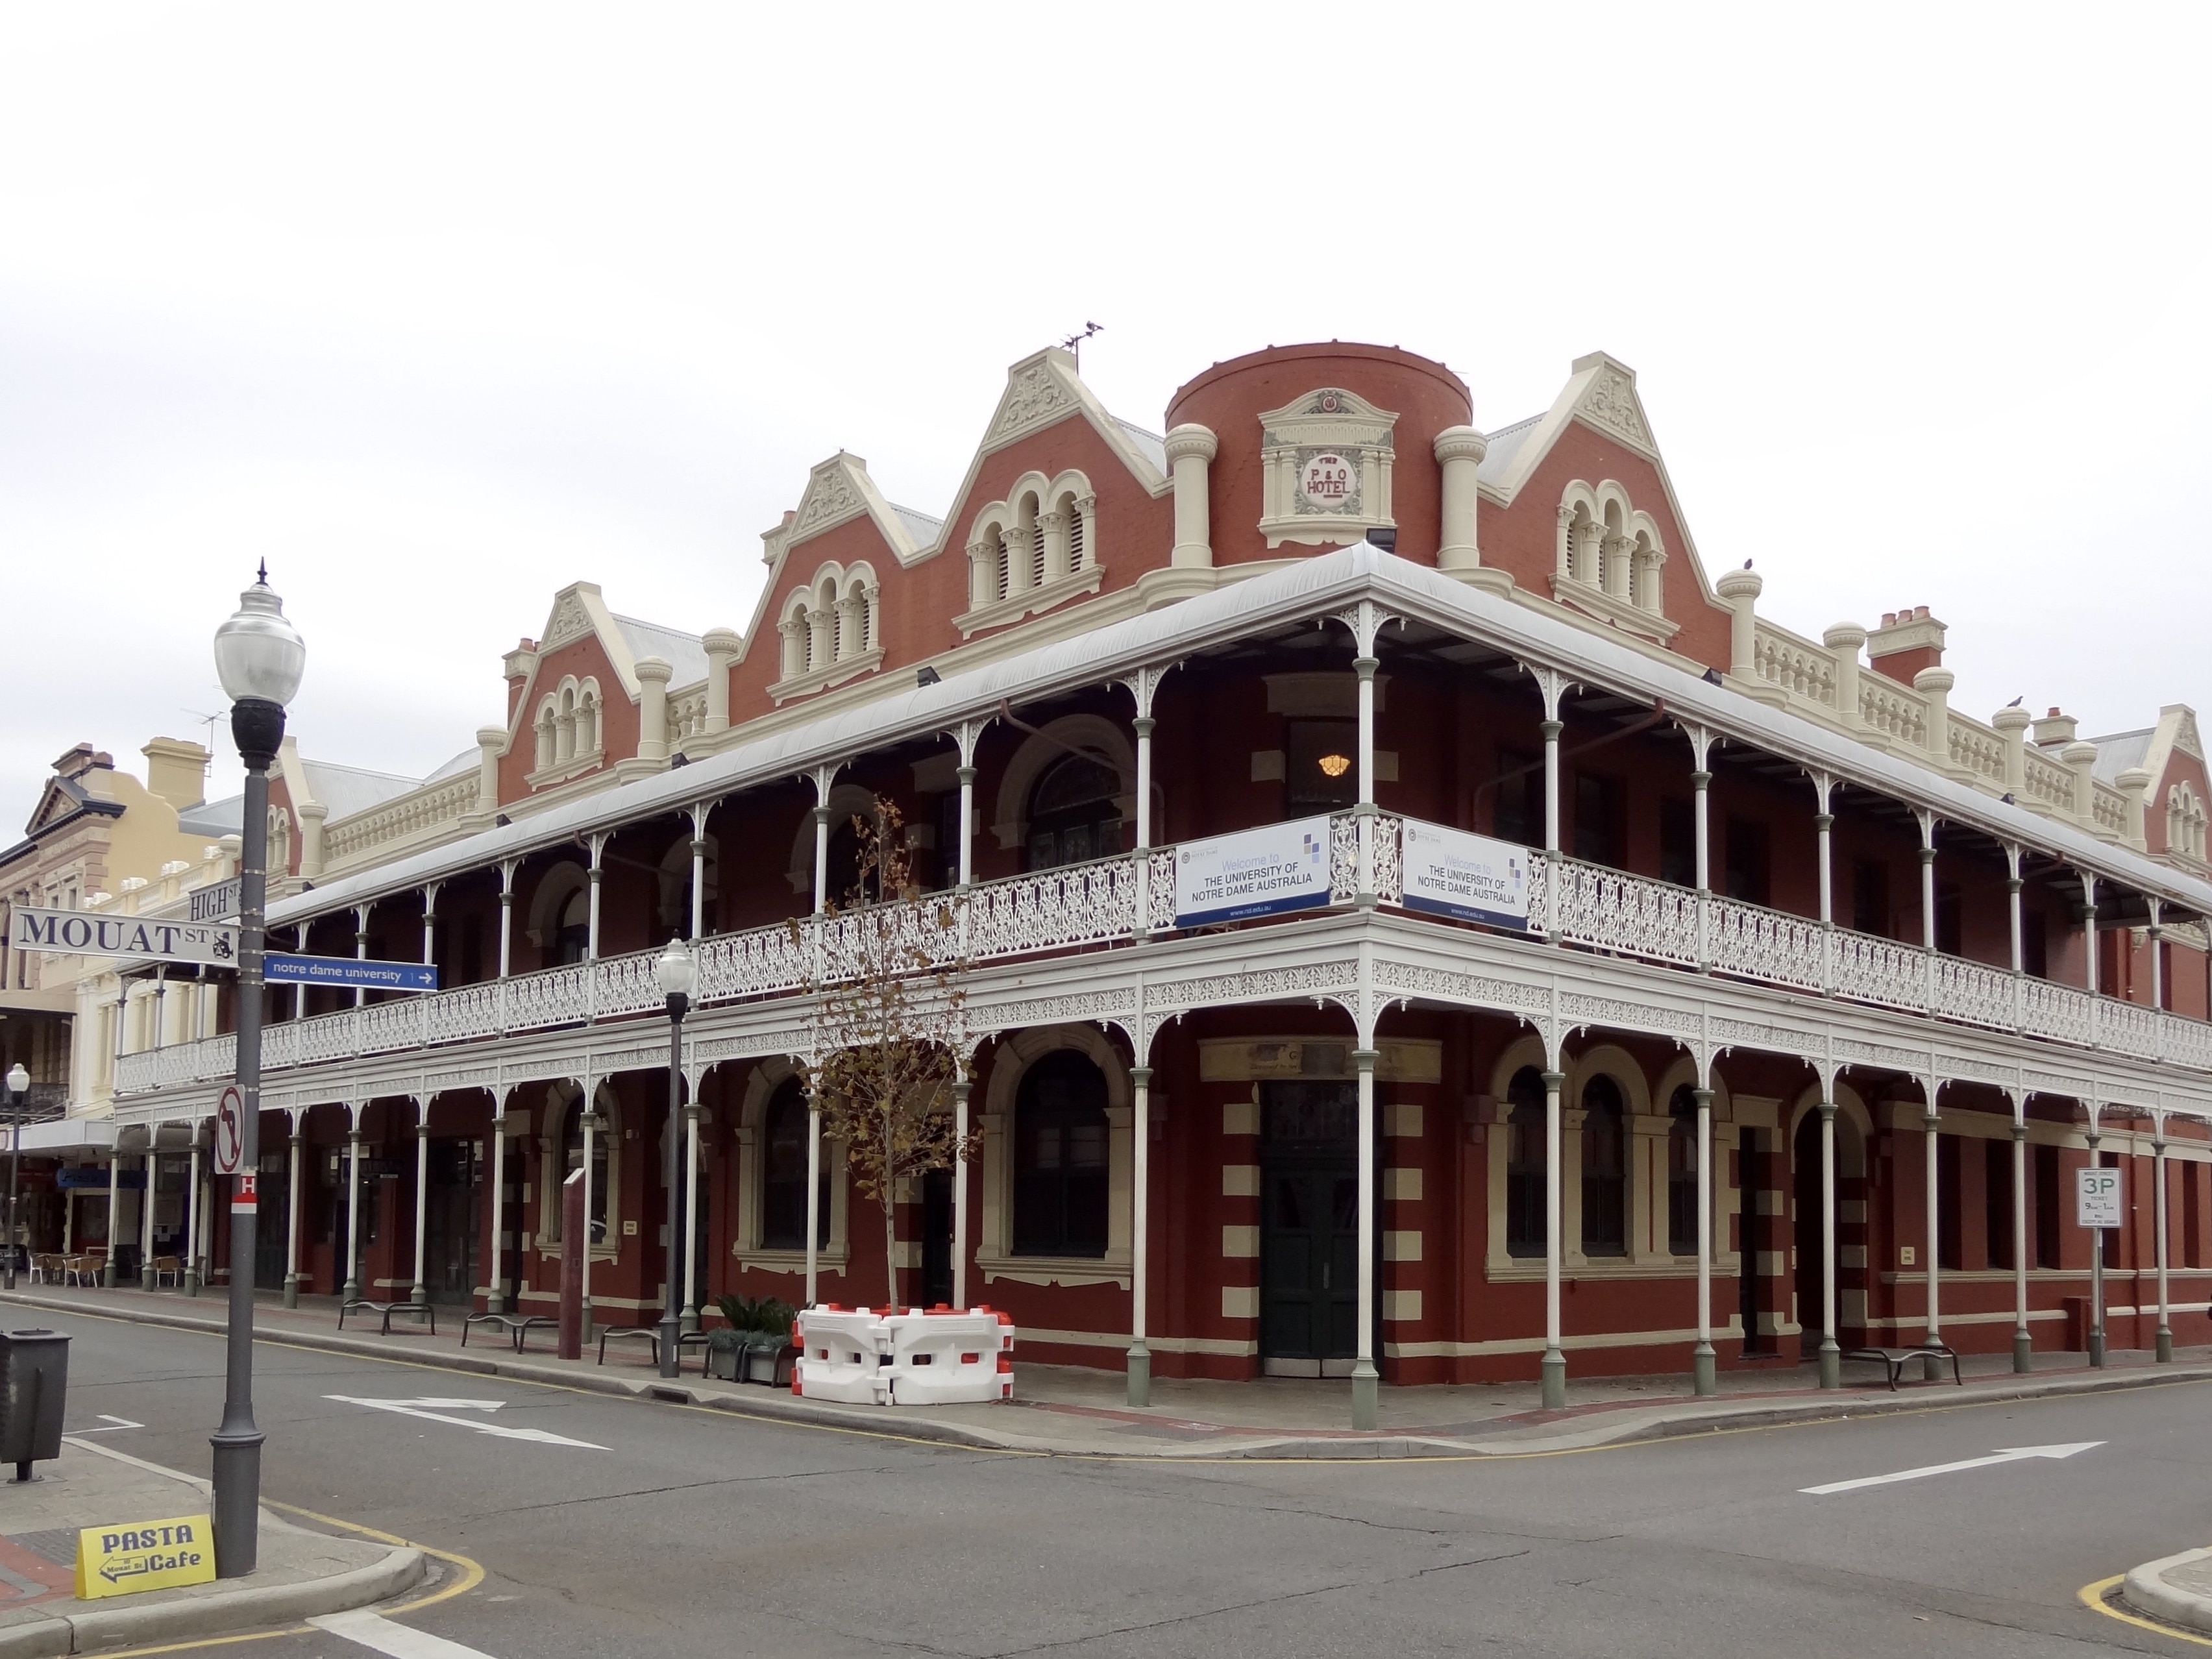 The Federation Filigree style P & O Hotel in Fremantle, Western Australia (Jun 2012): leased to the University of Notre Dame, Australia.